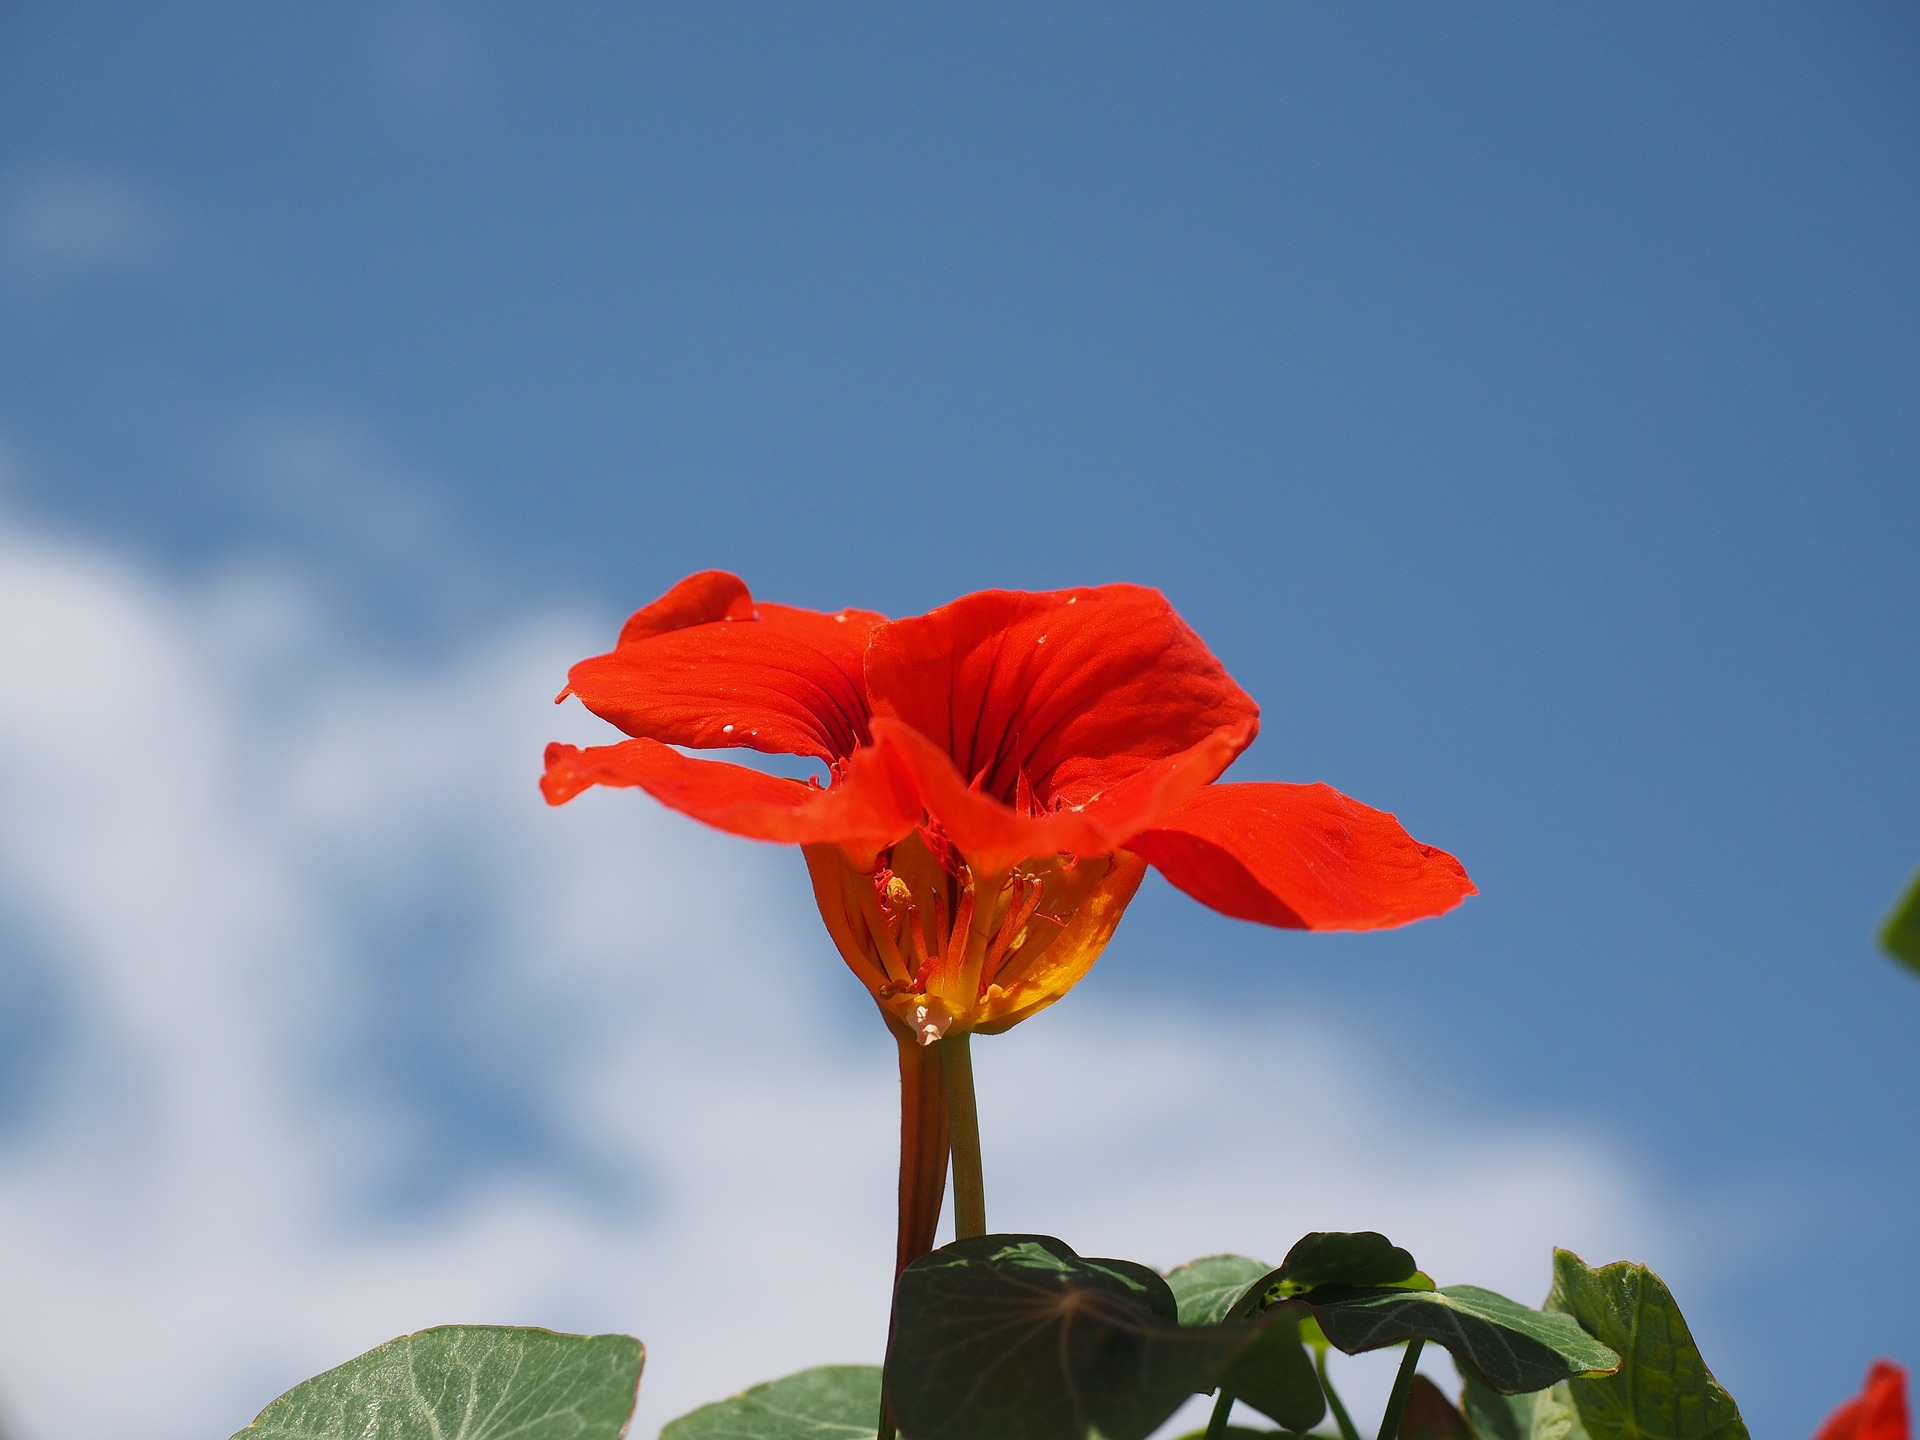 How to Grow and Use Nasturtium (for Health Benefits)